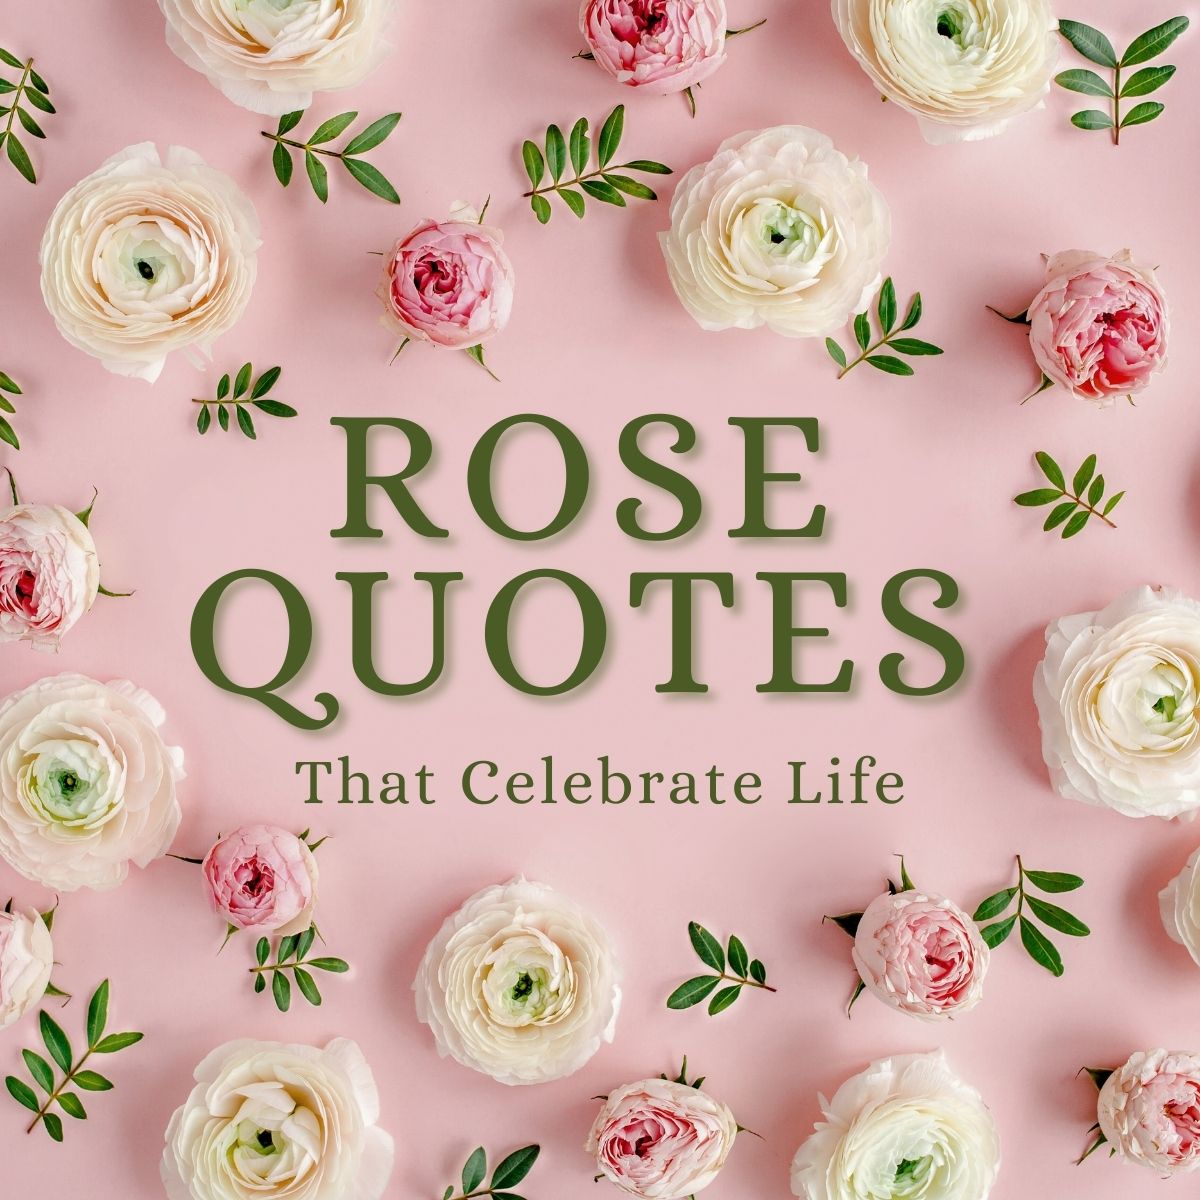 35 Amazing Roses Quotes That Celebrate Life's Beauty